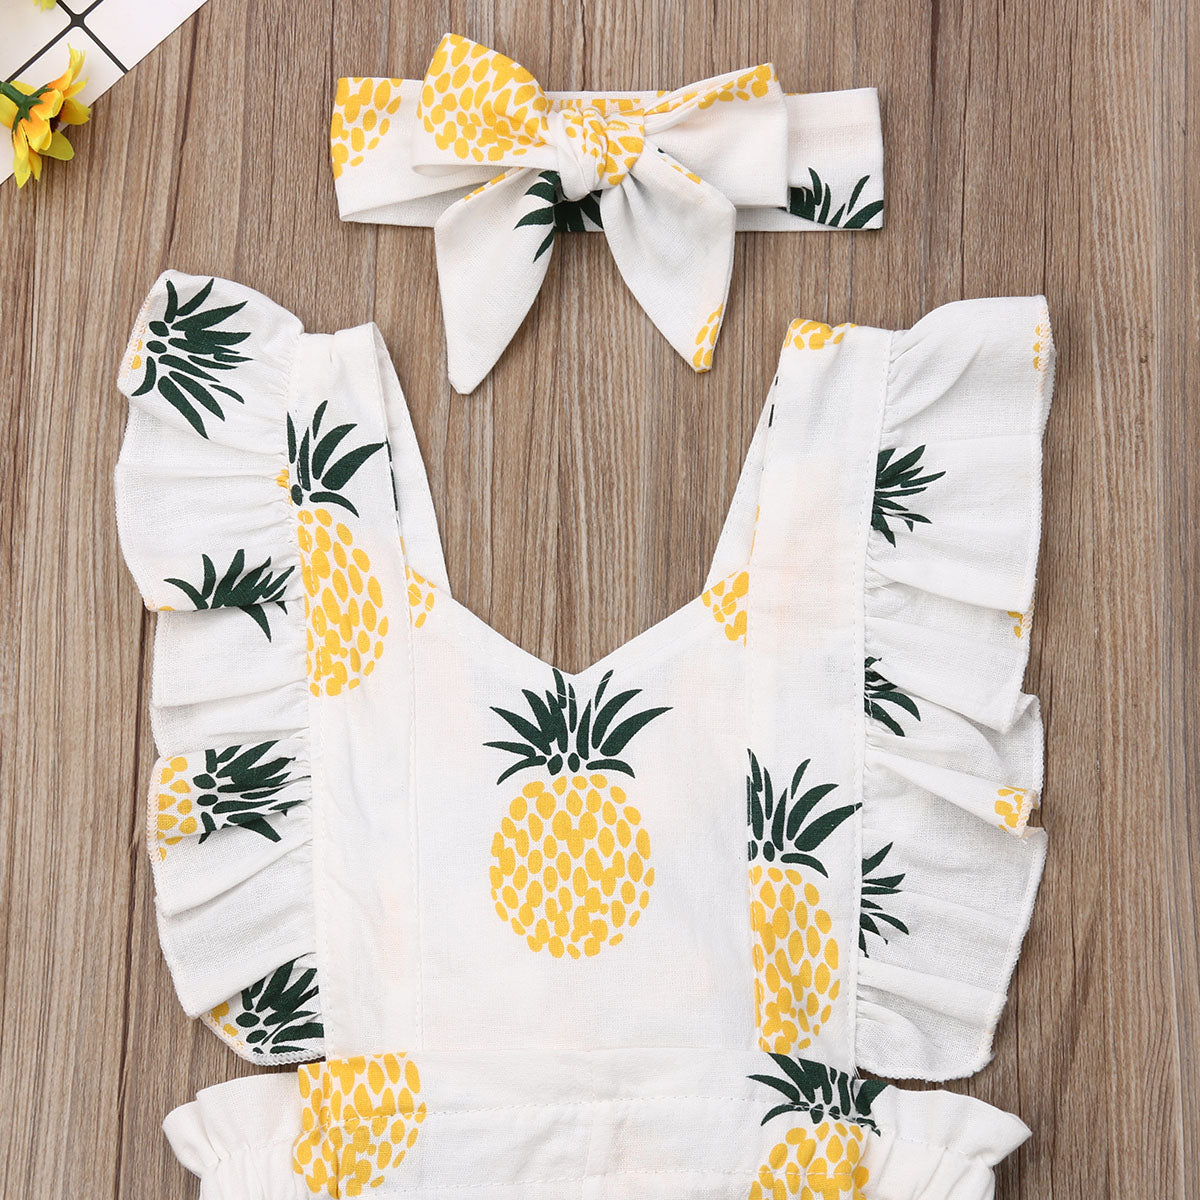 Pineapple Romper - Abby Apples Boutique